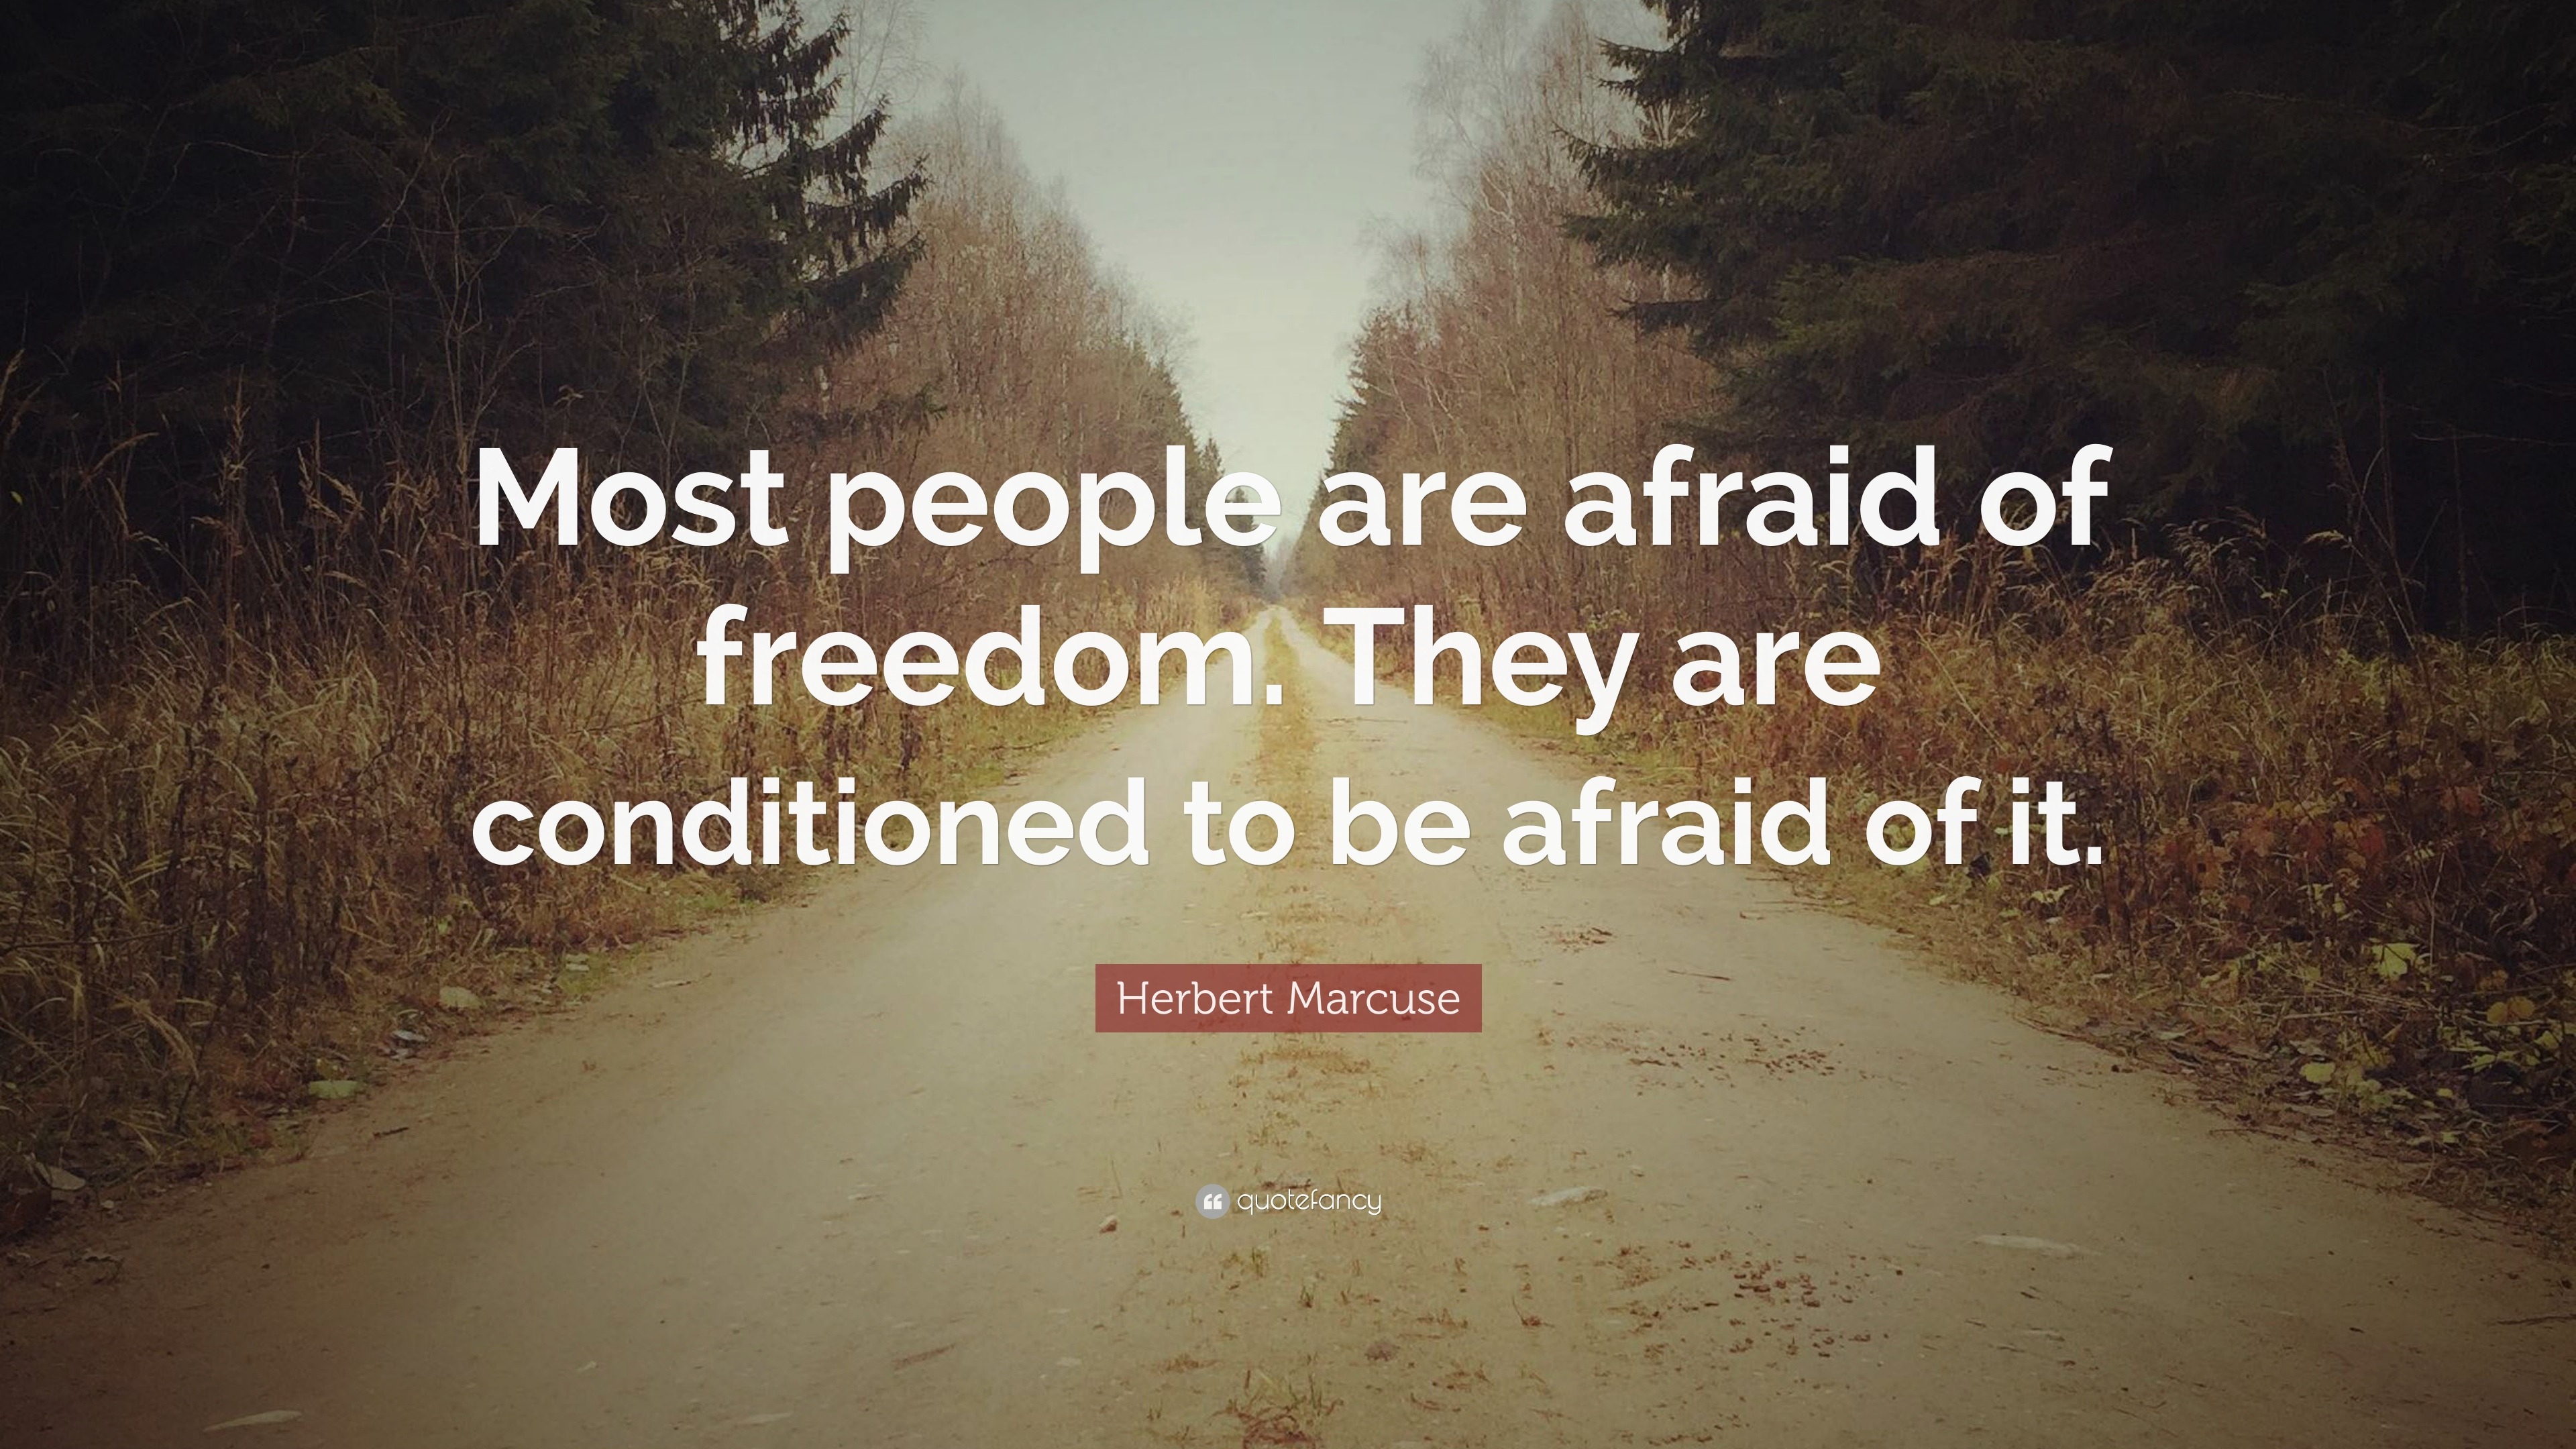 Herbert Marcuse Quote: “Most people are afraid of freedom. They are ...